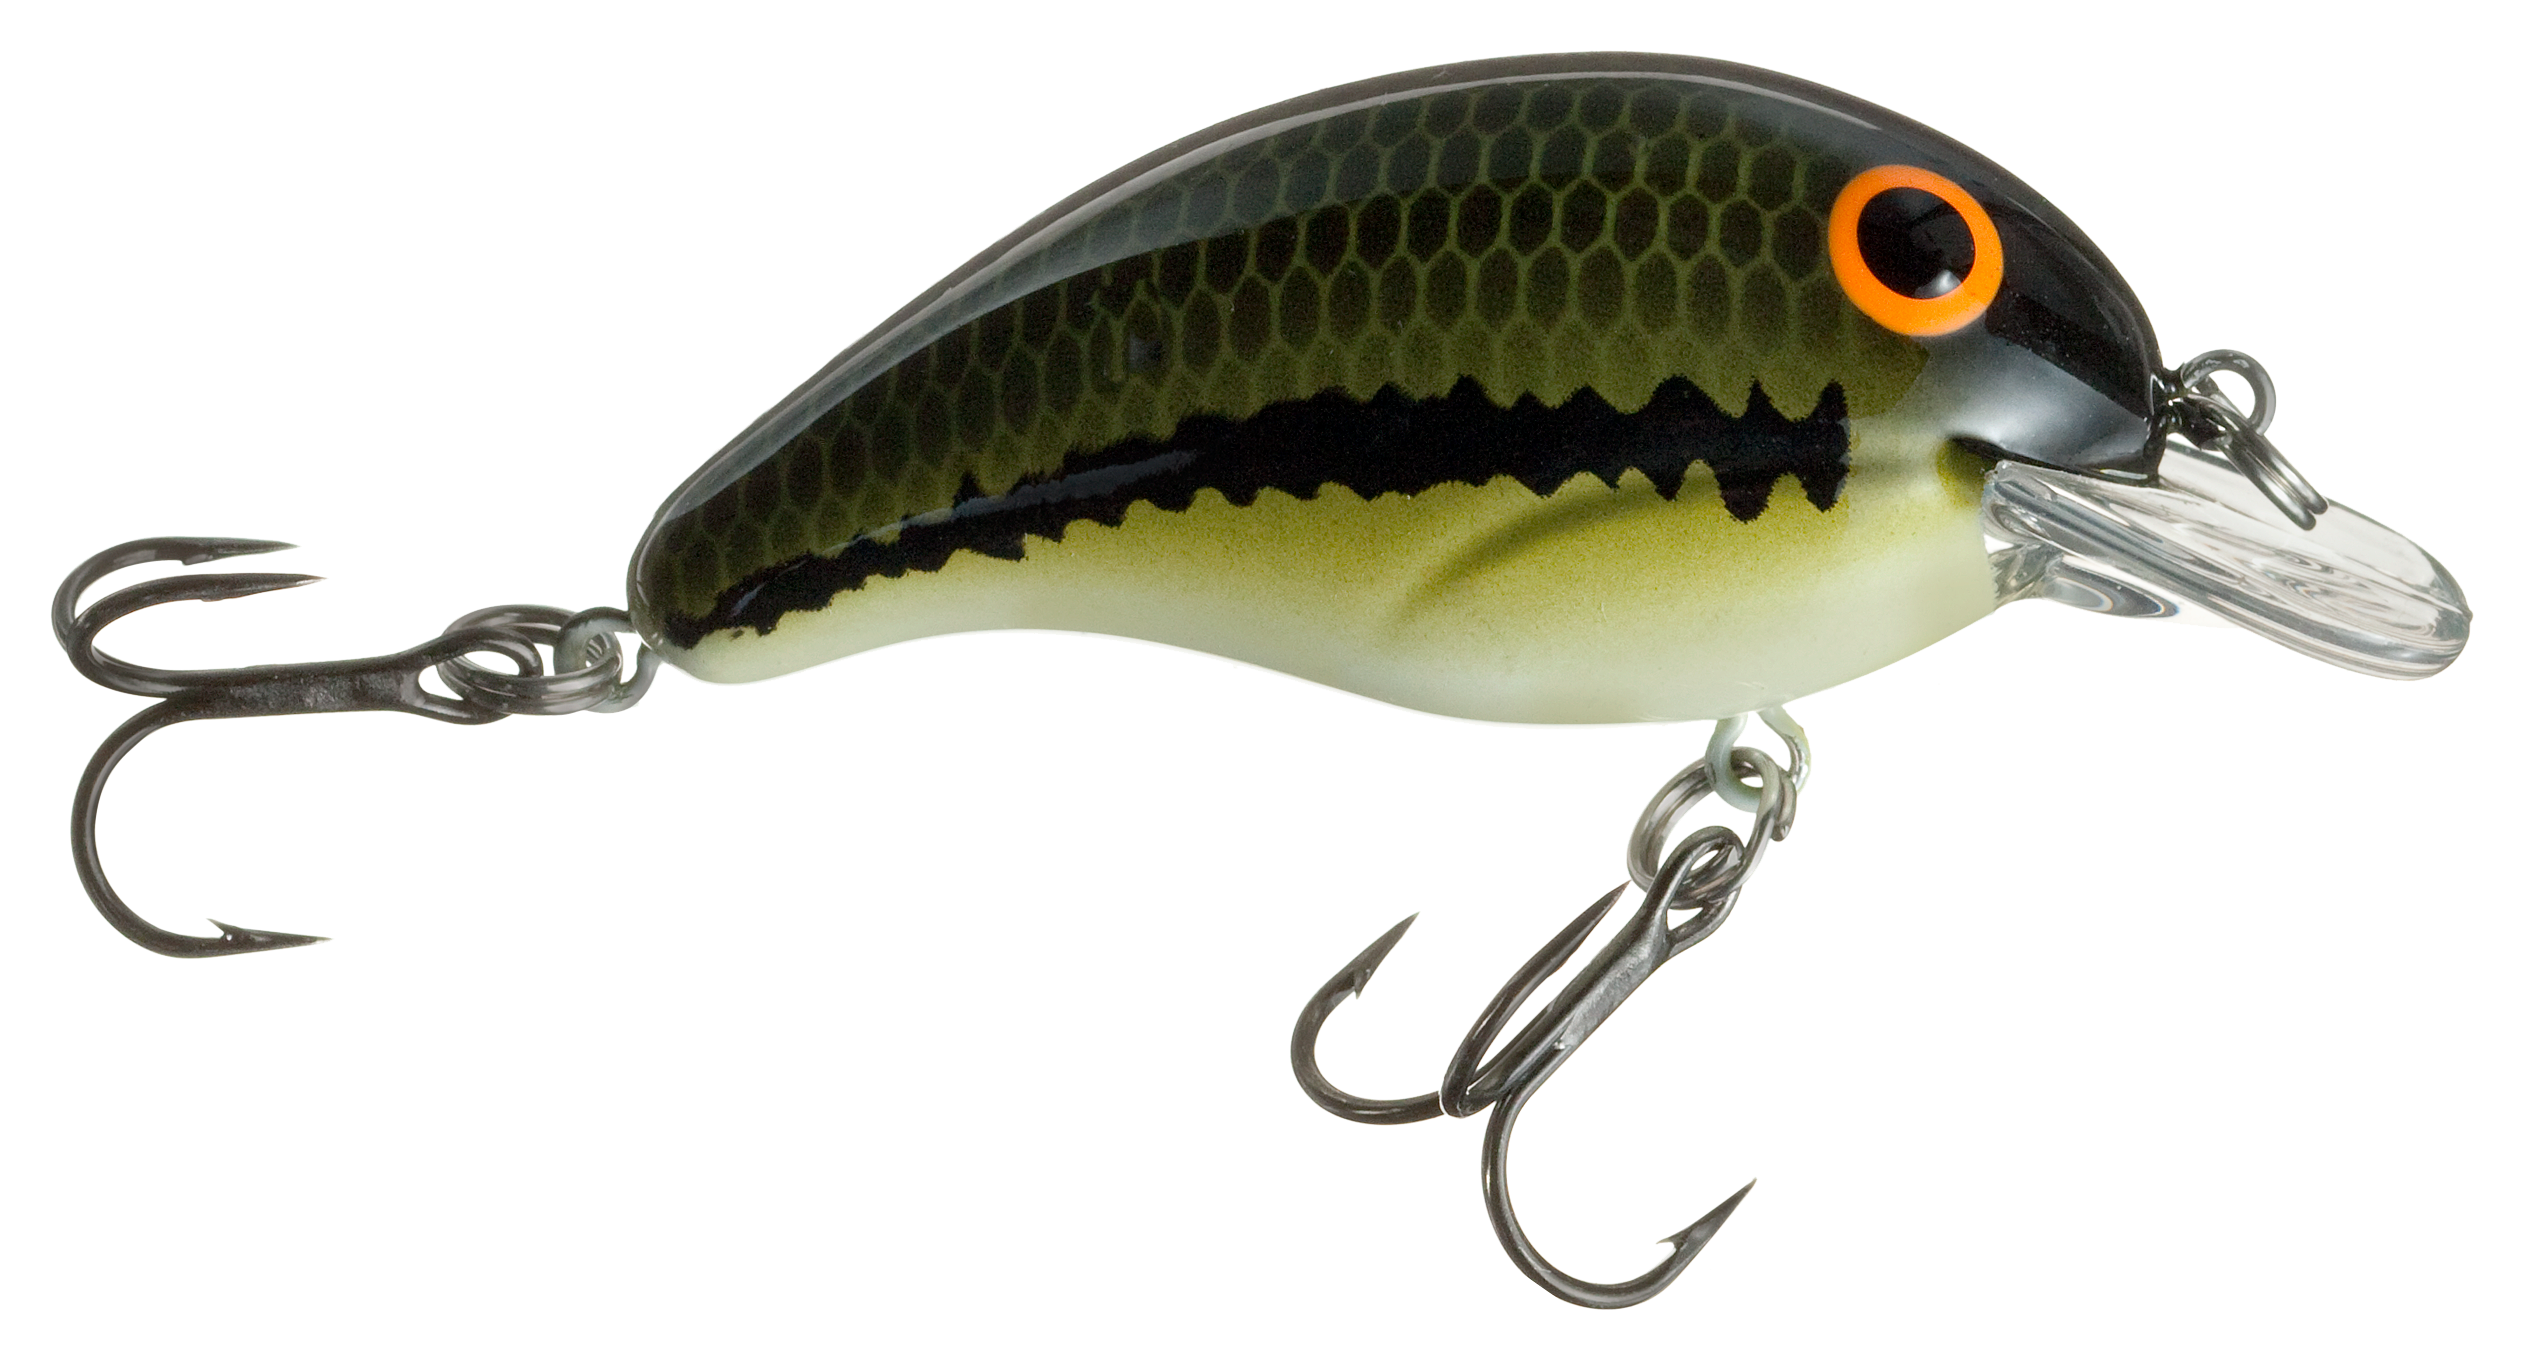  BANDIT LURES Series 100 Crankbait Bass Fishing Lures, Fishing  Accessories, Dives to 5-feet Deep, 2, 1/4 oz, Citrus Shad, (BDT1D01) :  Fishing Topwater Lures And Crankbaits : Sports & Outdoors